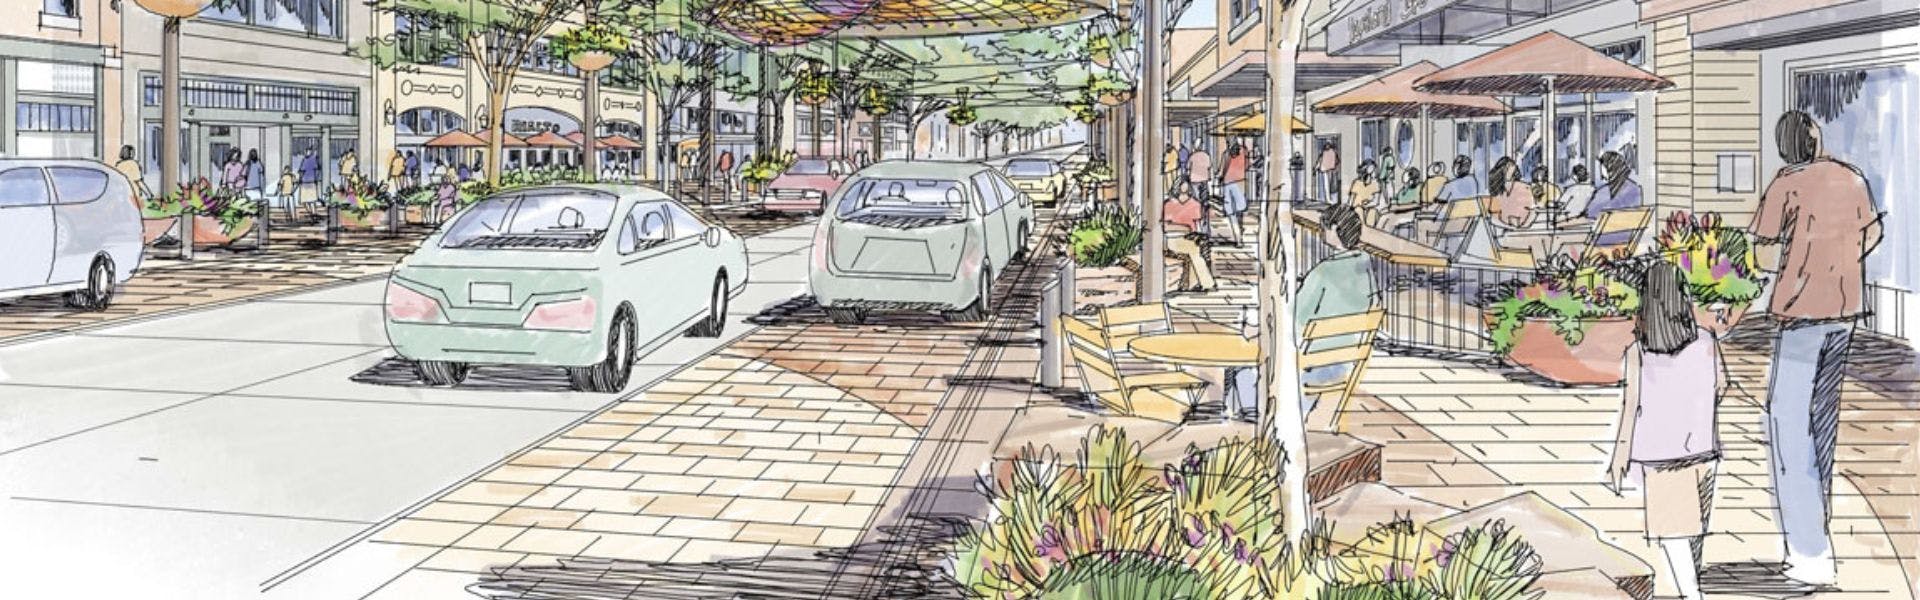 An artist rendering of a street. There is a brick walkway with outdoor seating.